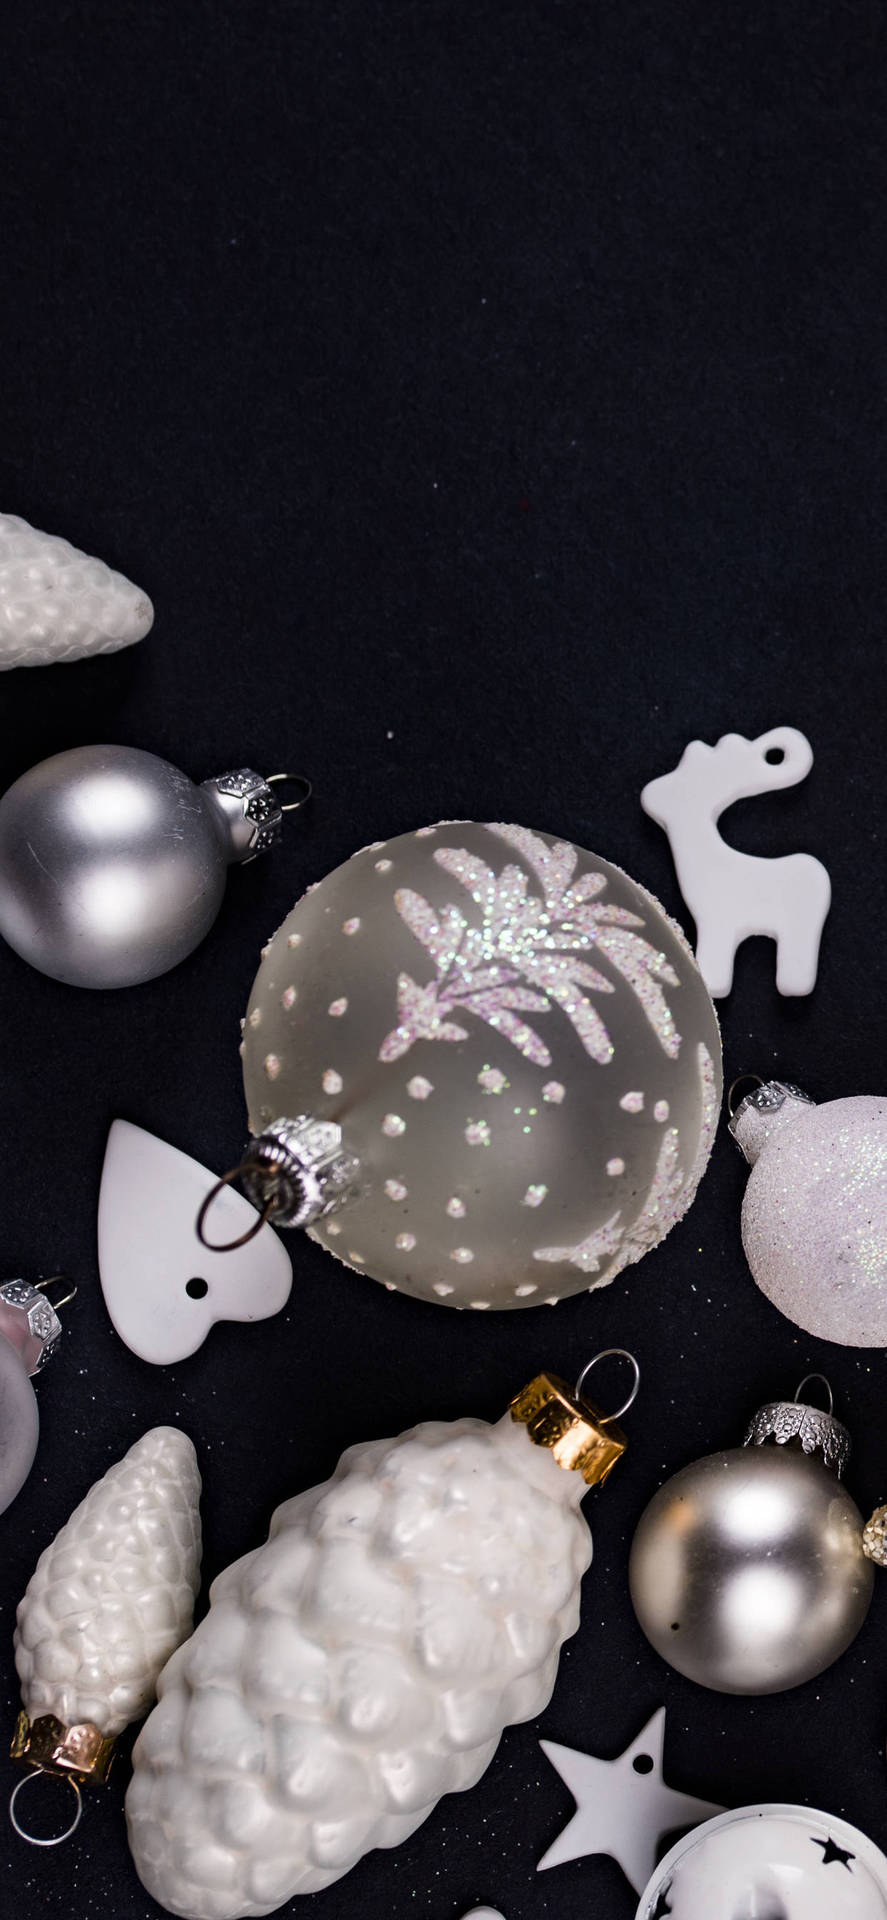 A black and white Christmas background with silver and white decorations - Silver